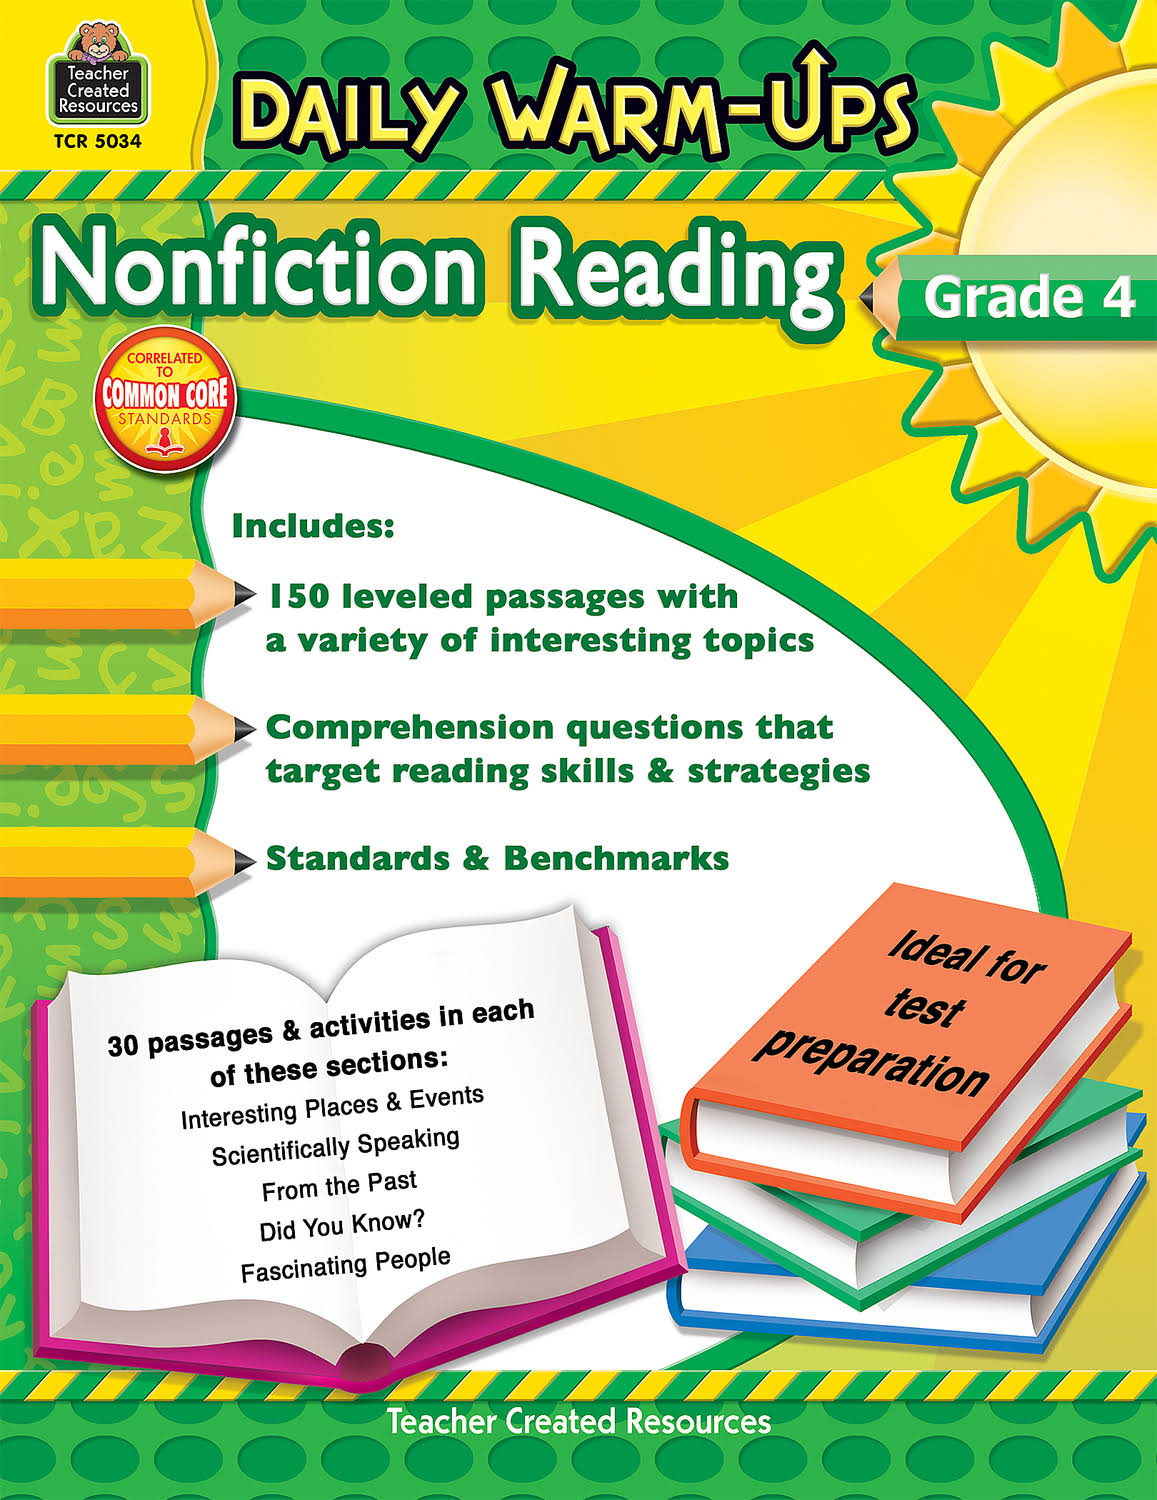 Daily Warm Ups Grade 4 Nonfiction Reading - Teacher Created Resources